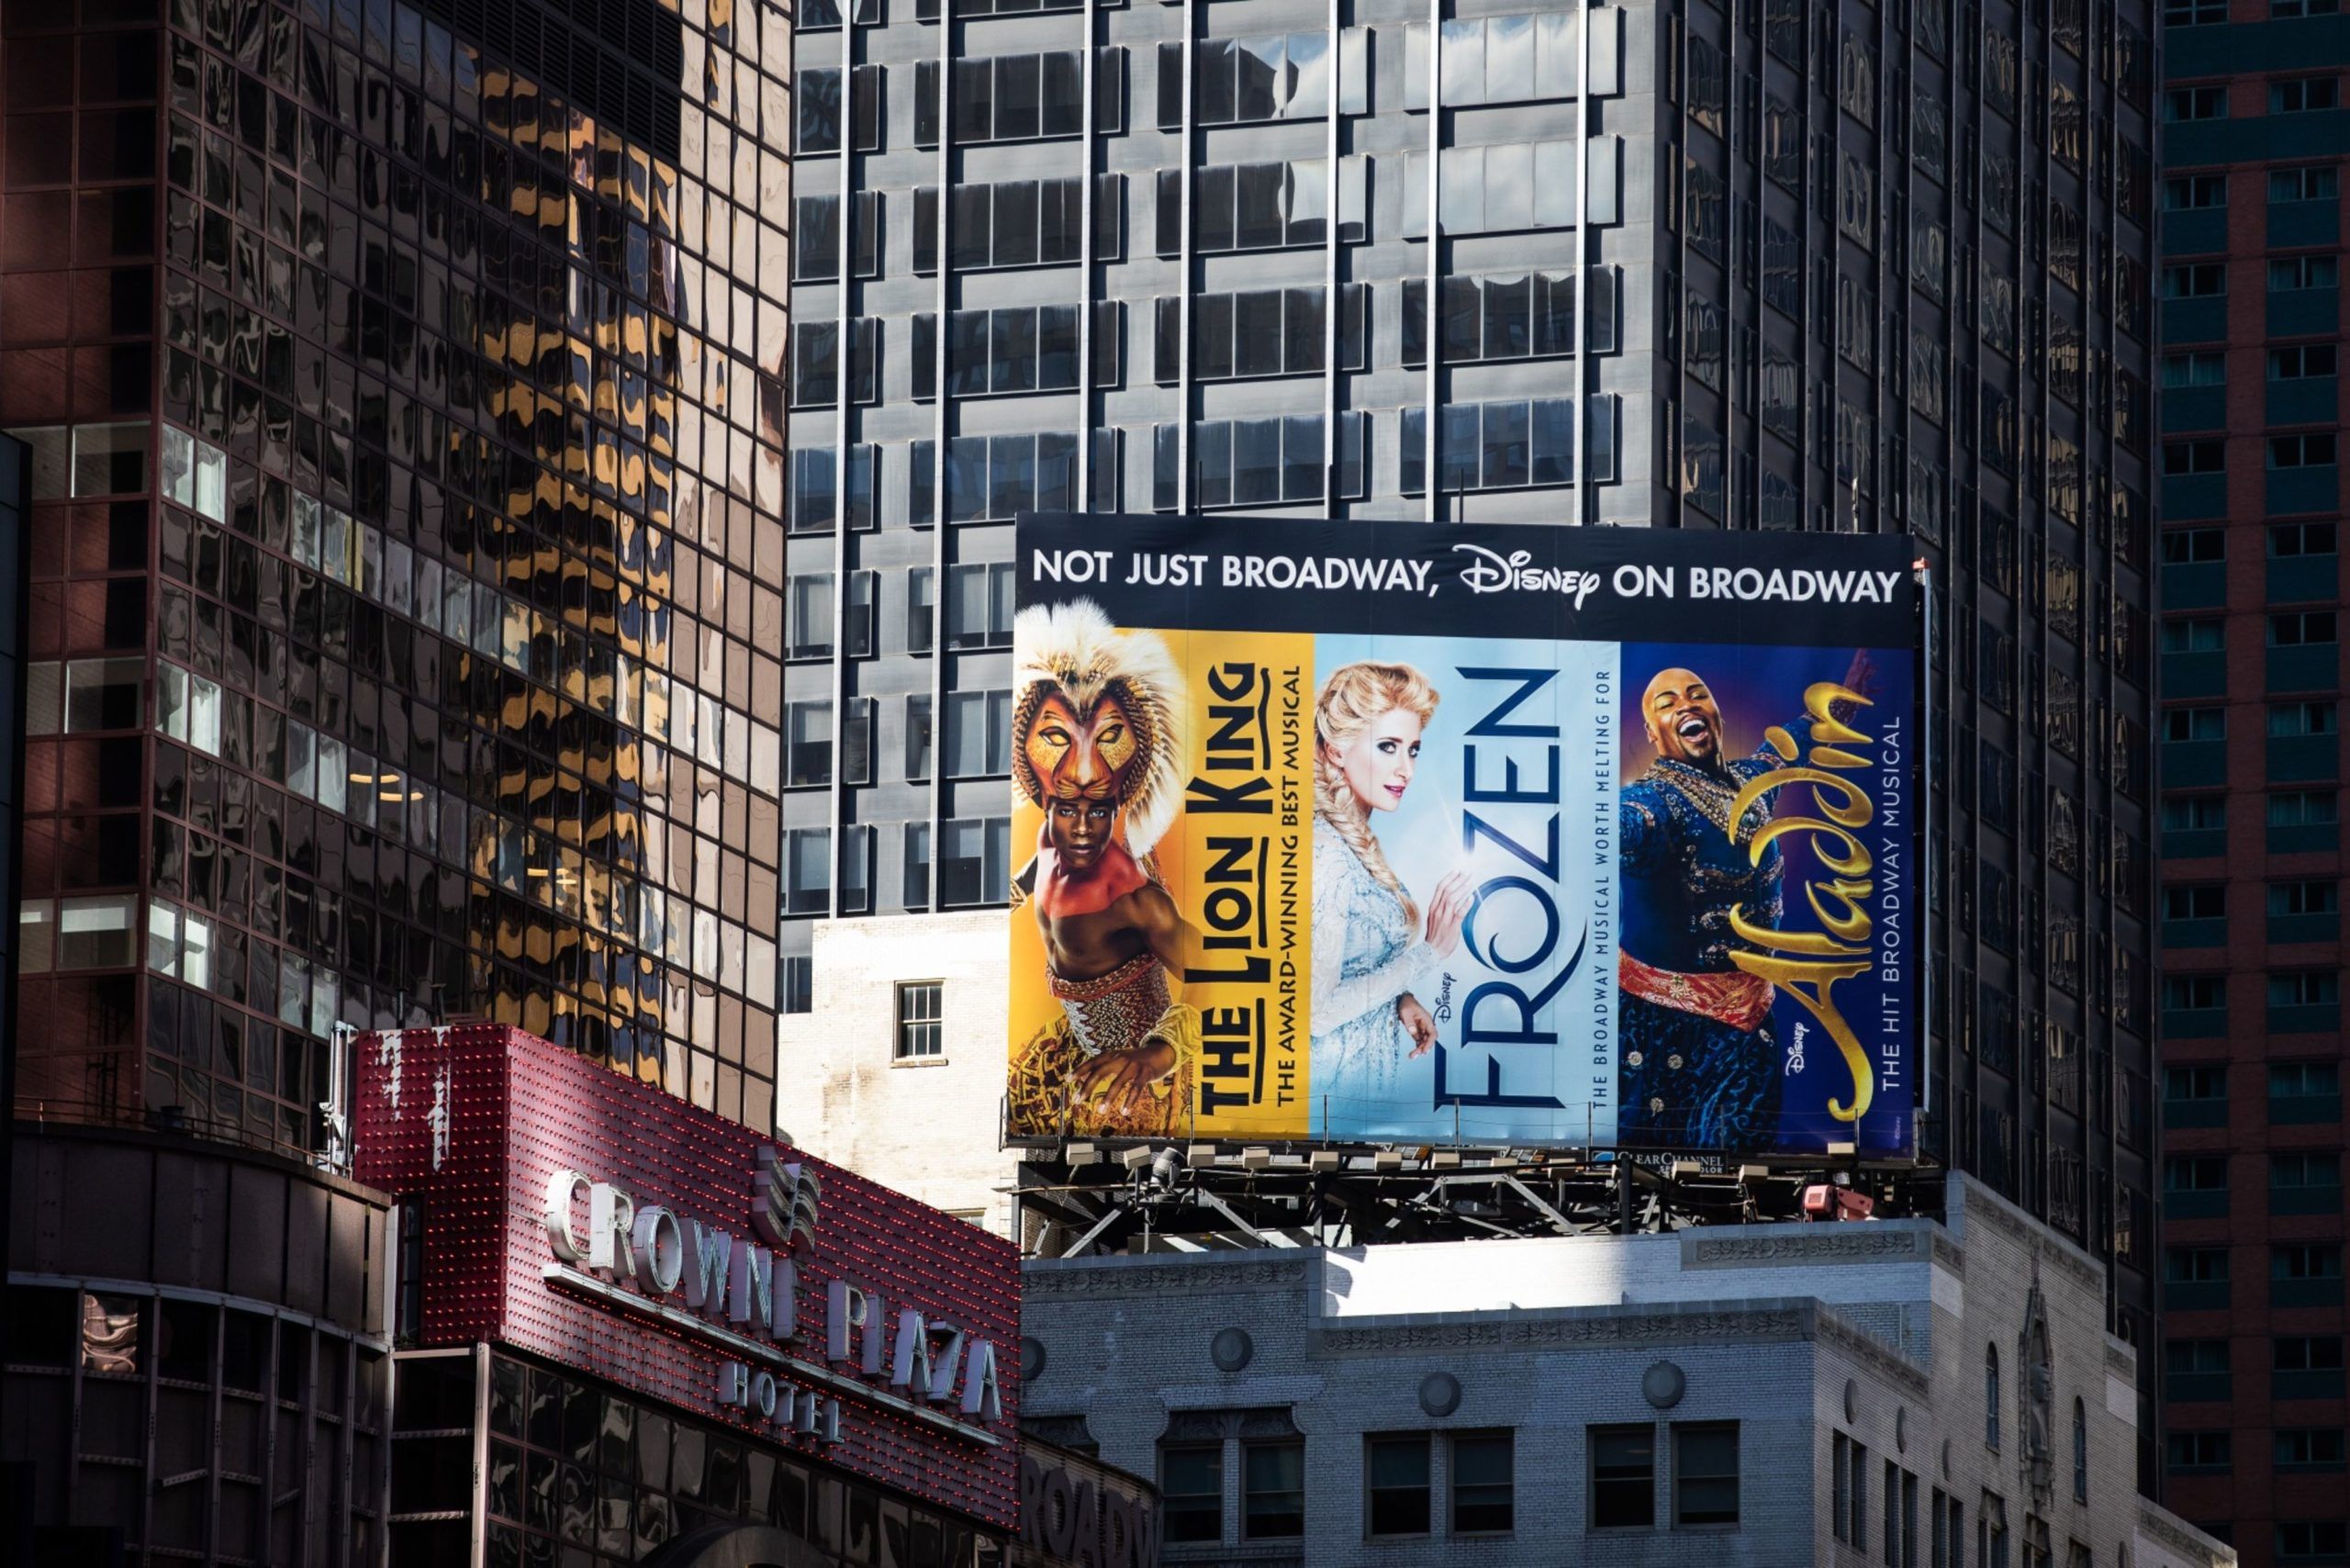 Billboards for Walt Disney Co. The Lion King, Frozen and Aladdin Broadway musicals stand on display in the Times Square area of New York, U.S., on Tuesday, May 12, 2020 during New York City's lockdown